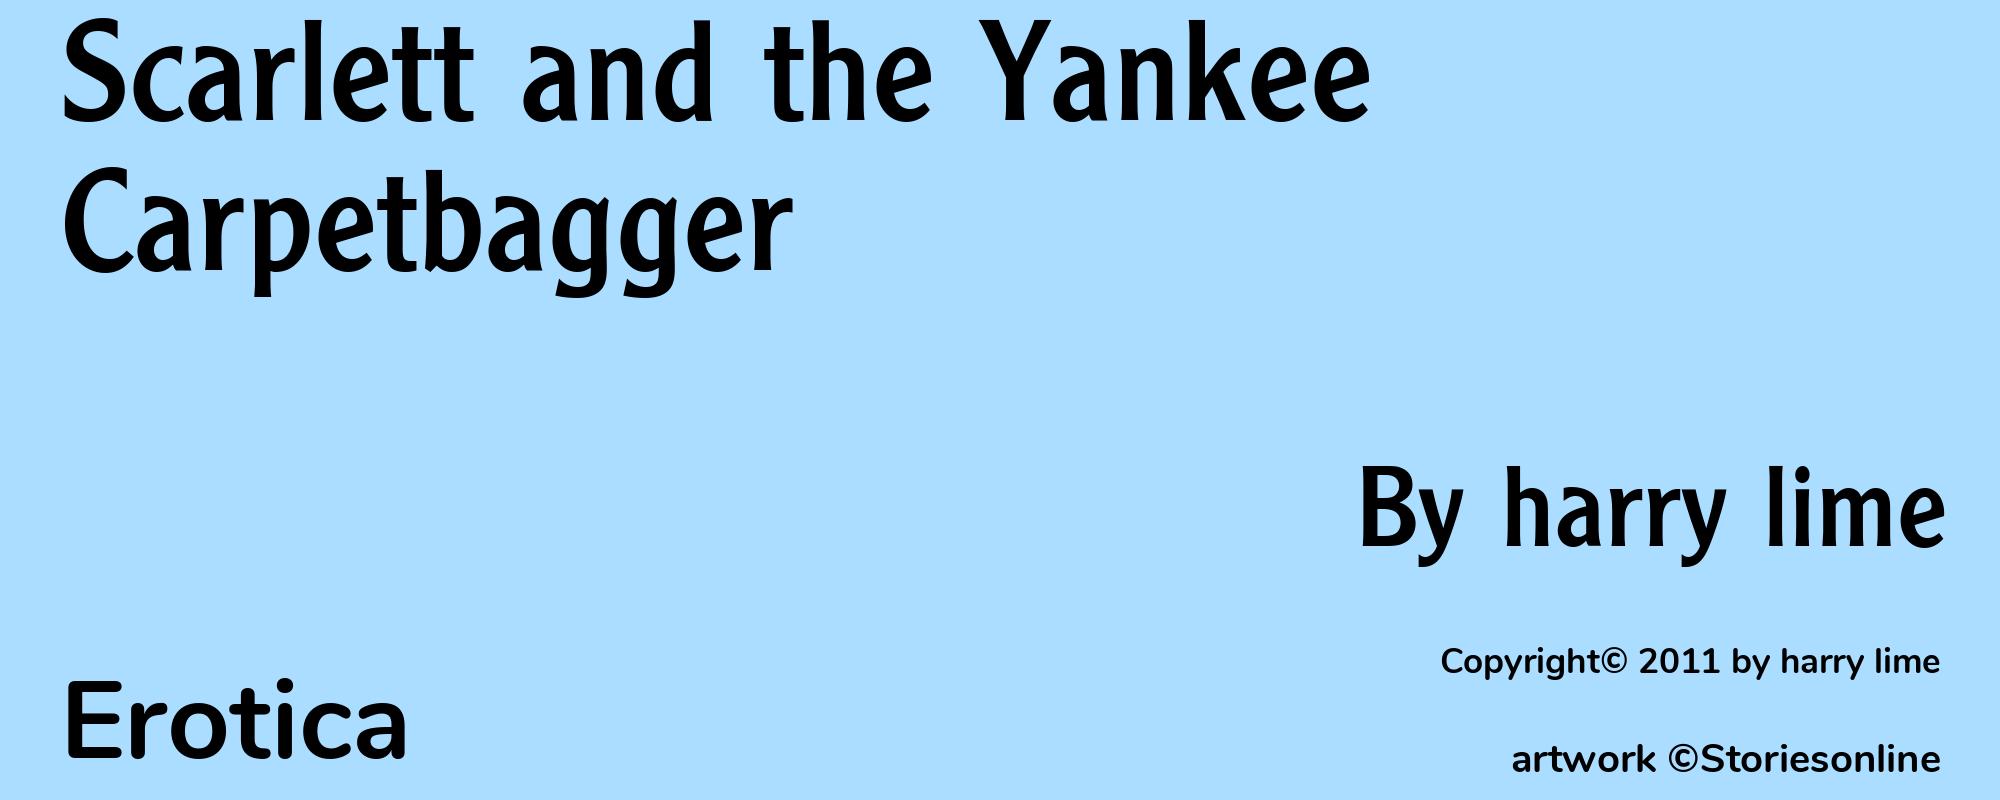 Scarlett and the Yankee Carpetbagger - Cover